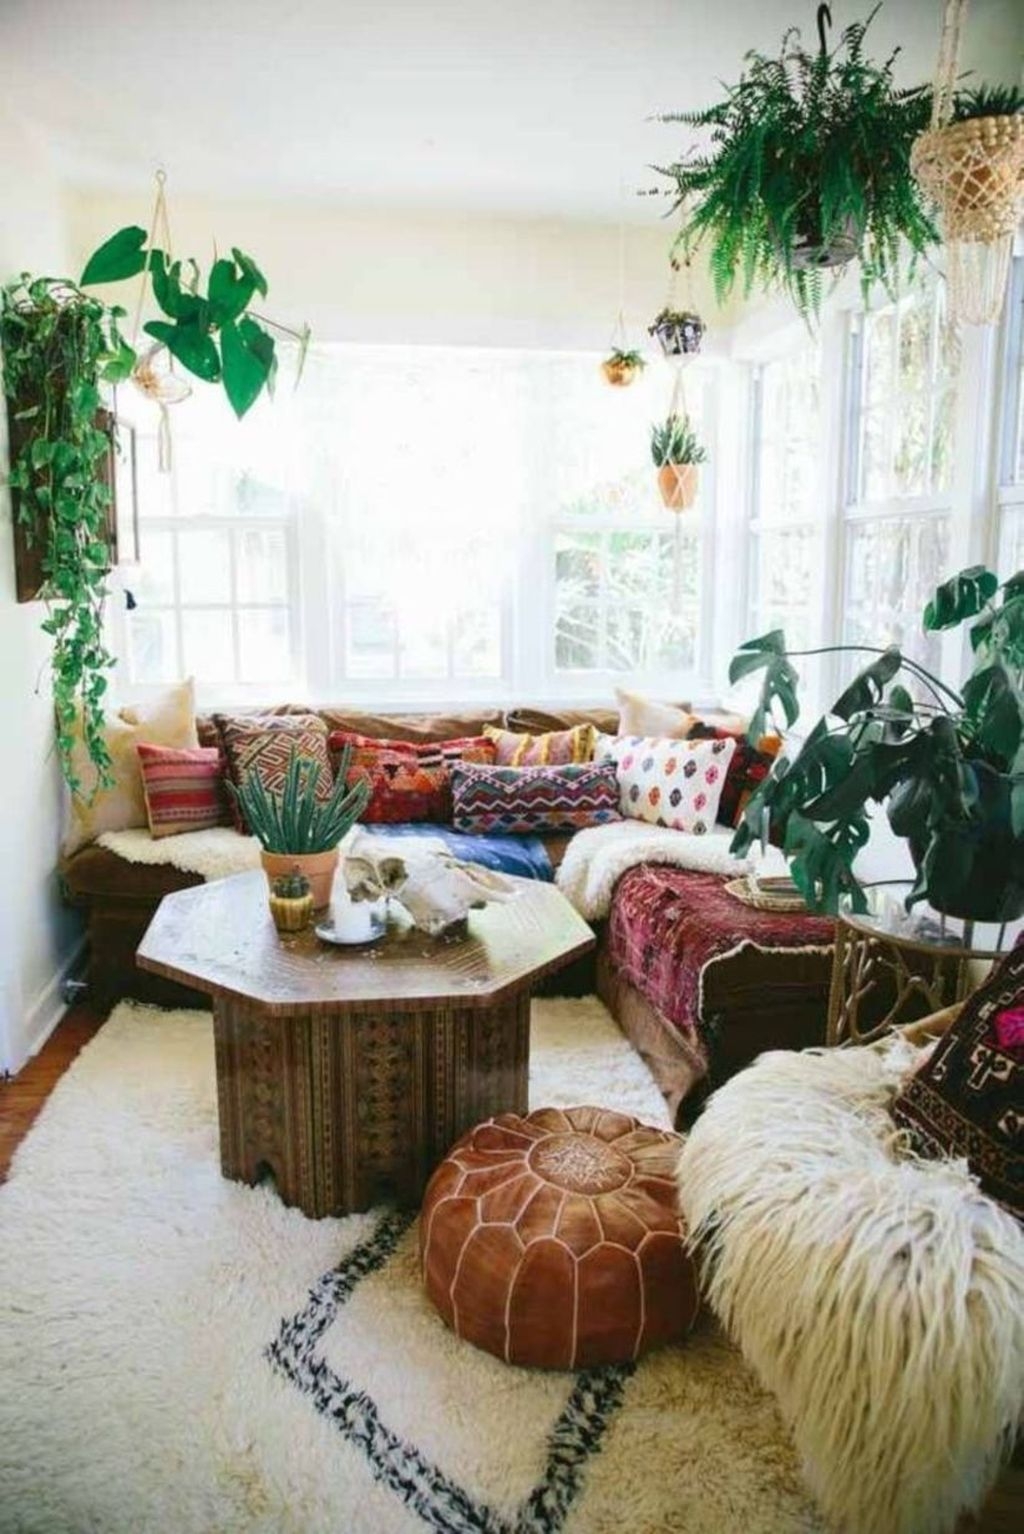 The Best Bohemian Farmhouse Decorating Ideas For Your Living Room 42 Pimphomee